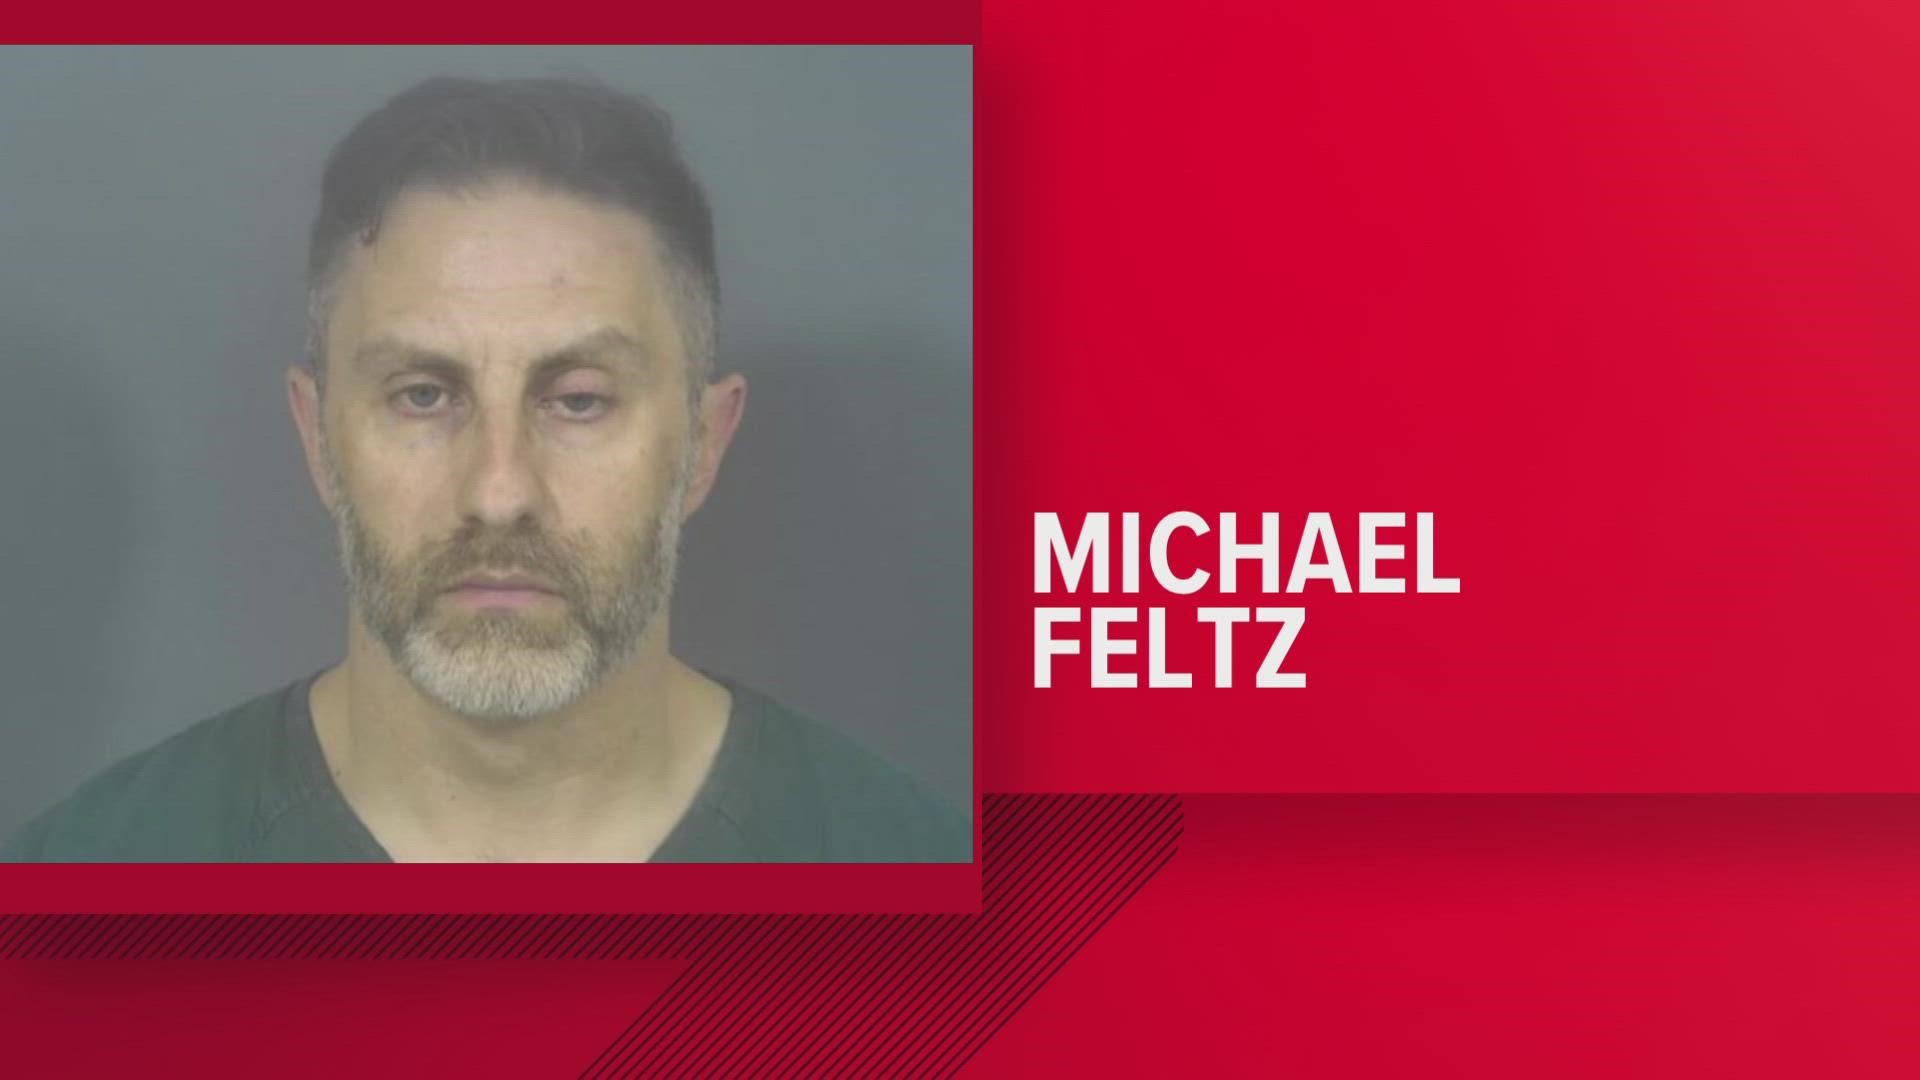 Michael Feltz faces a 30-year prison sentence after pleading guilty to molesting a 13-year-old girl who had played on one of his travel teams.